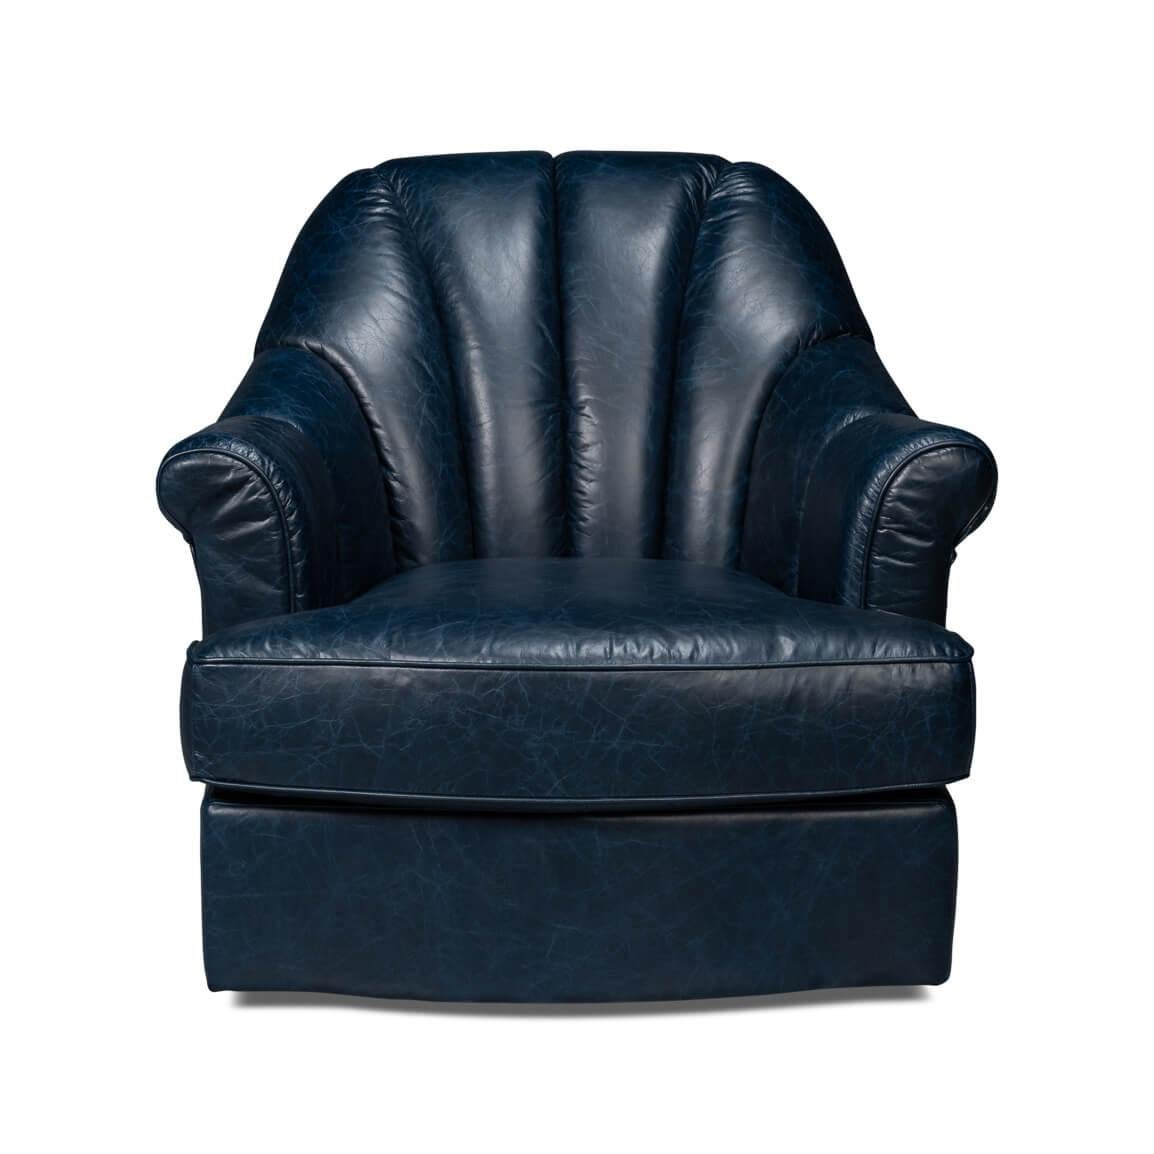 
A haven of relaxation where classic design meets cloud-like comfort. With its generously padded, rolled armrests and deep, inviting seat cushion, this chair is a call to leisure, crafted in premium full-grain leather that exudes warmth and